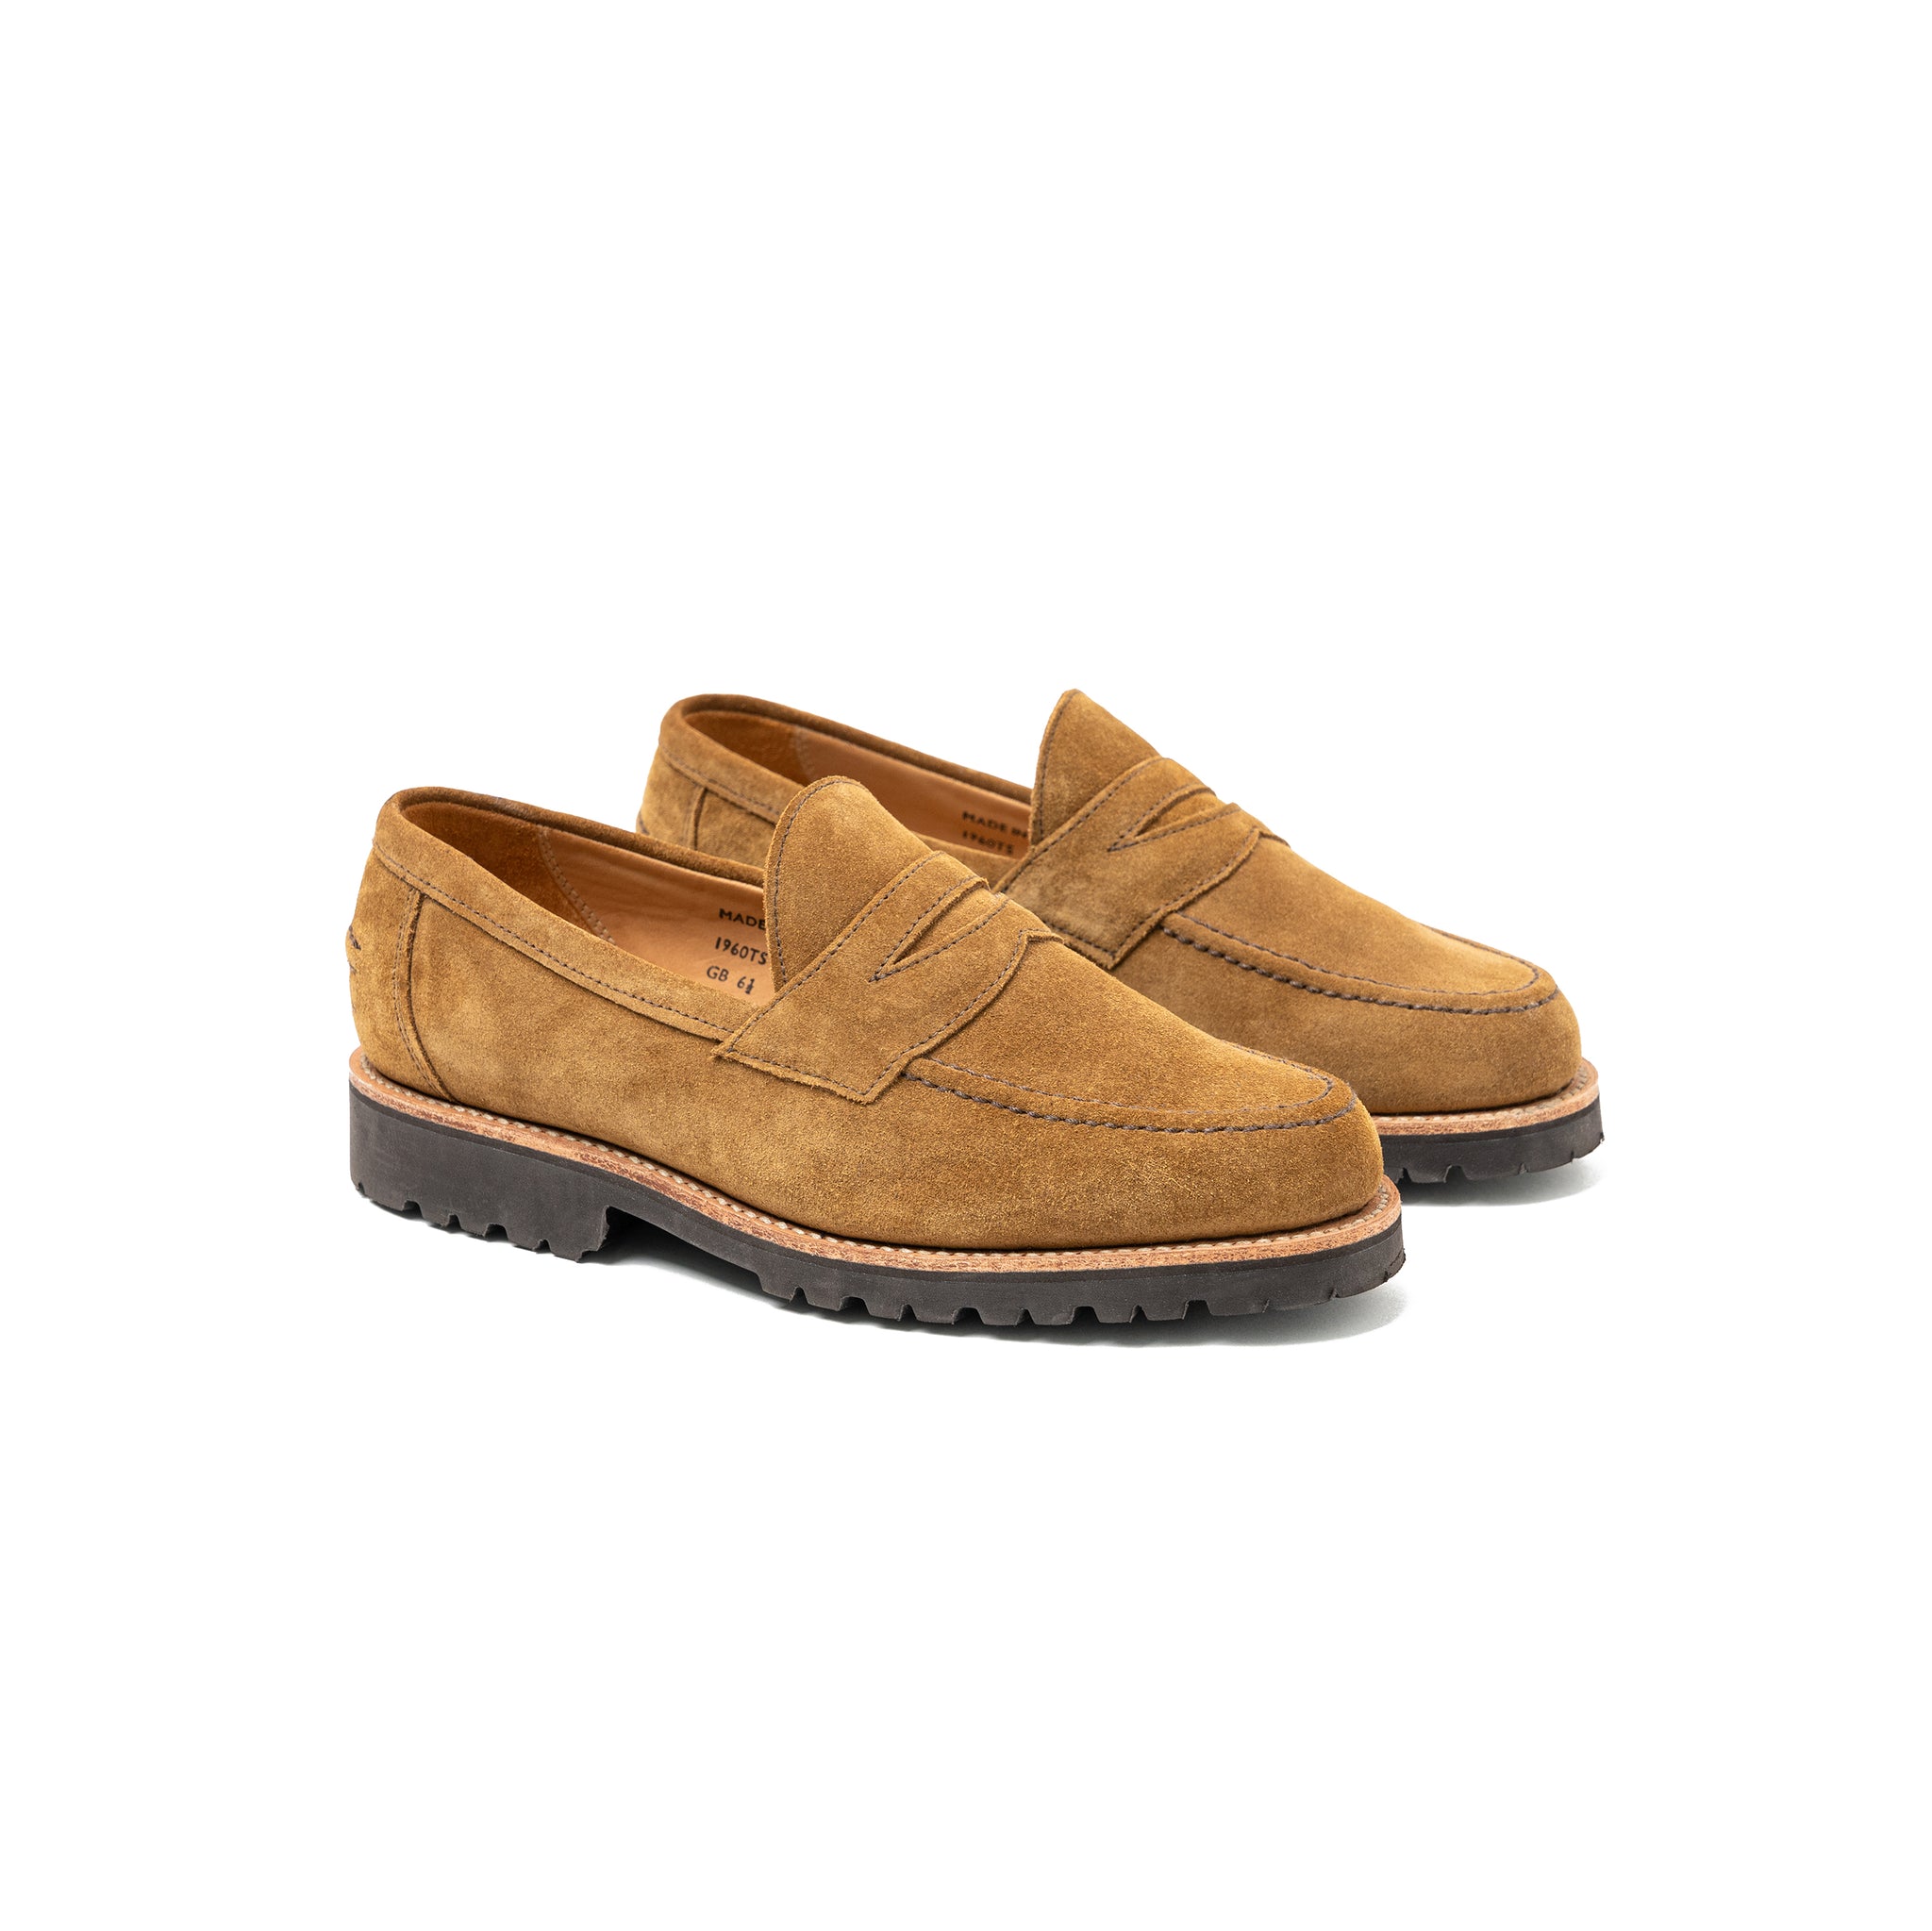 loafers with vibram soles